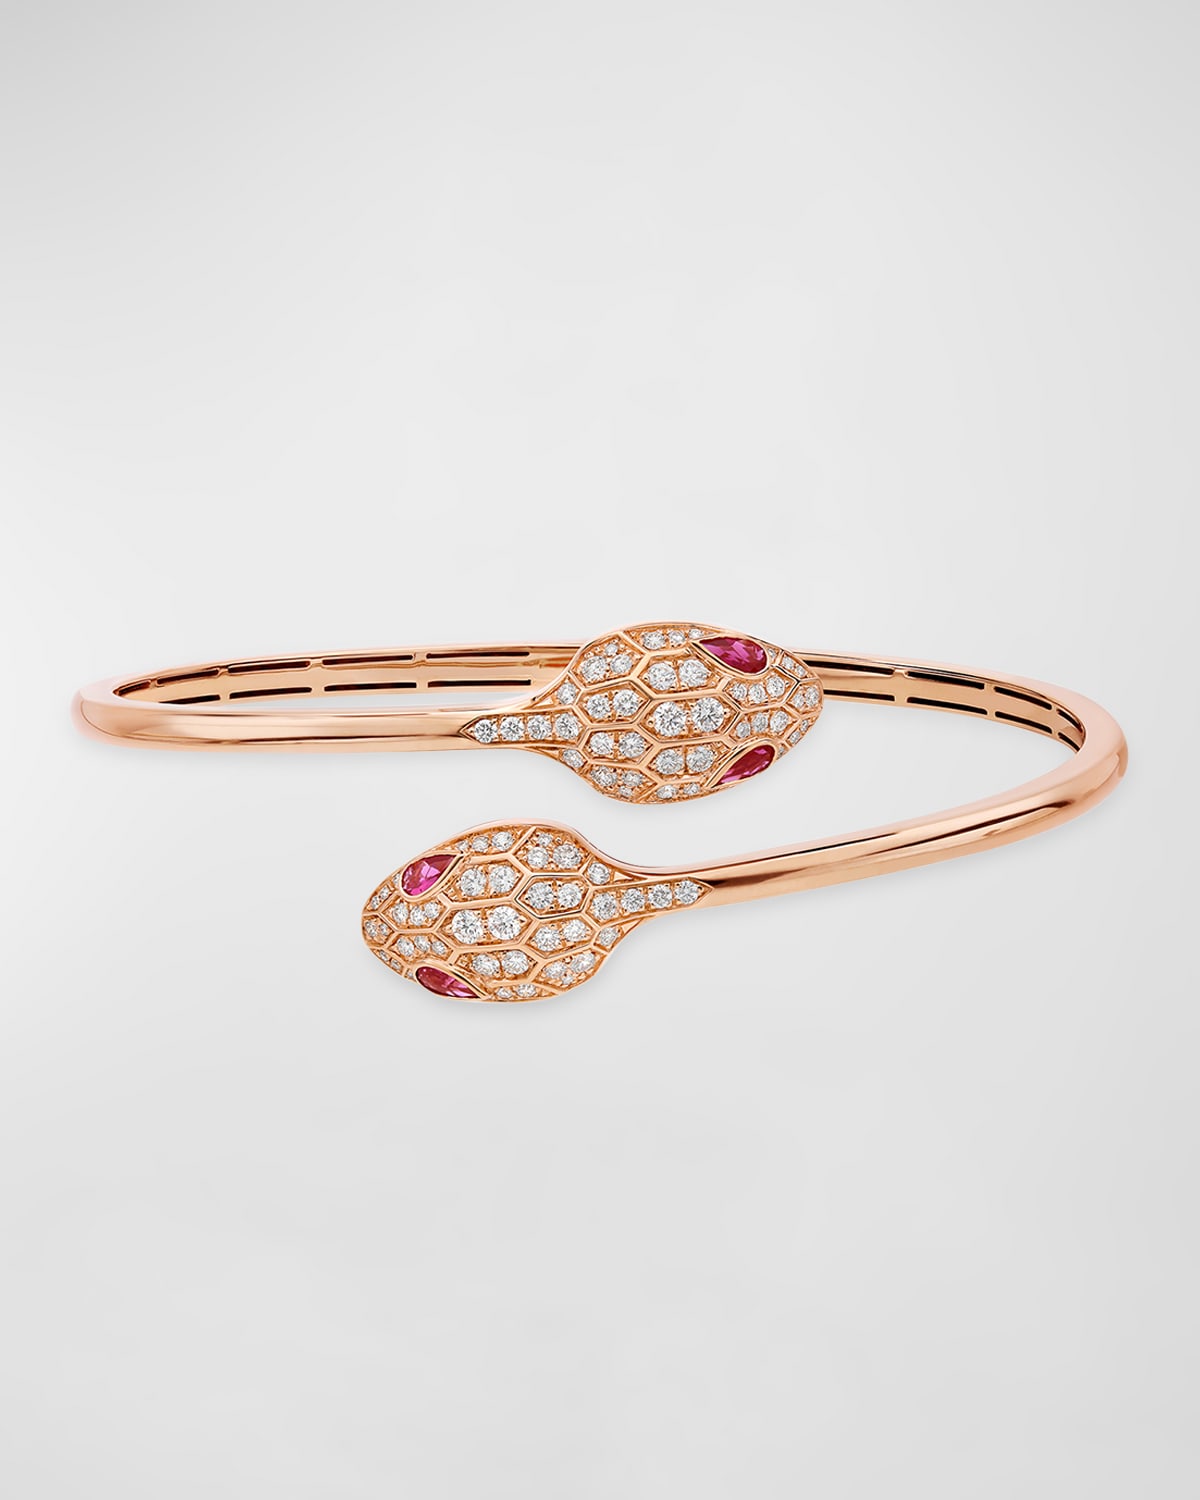 Serpenti Bypass Bracelet in 18k Rose Gold and Diamonds, Size M